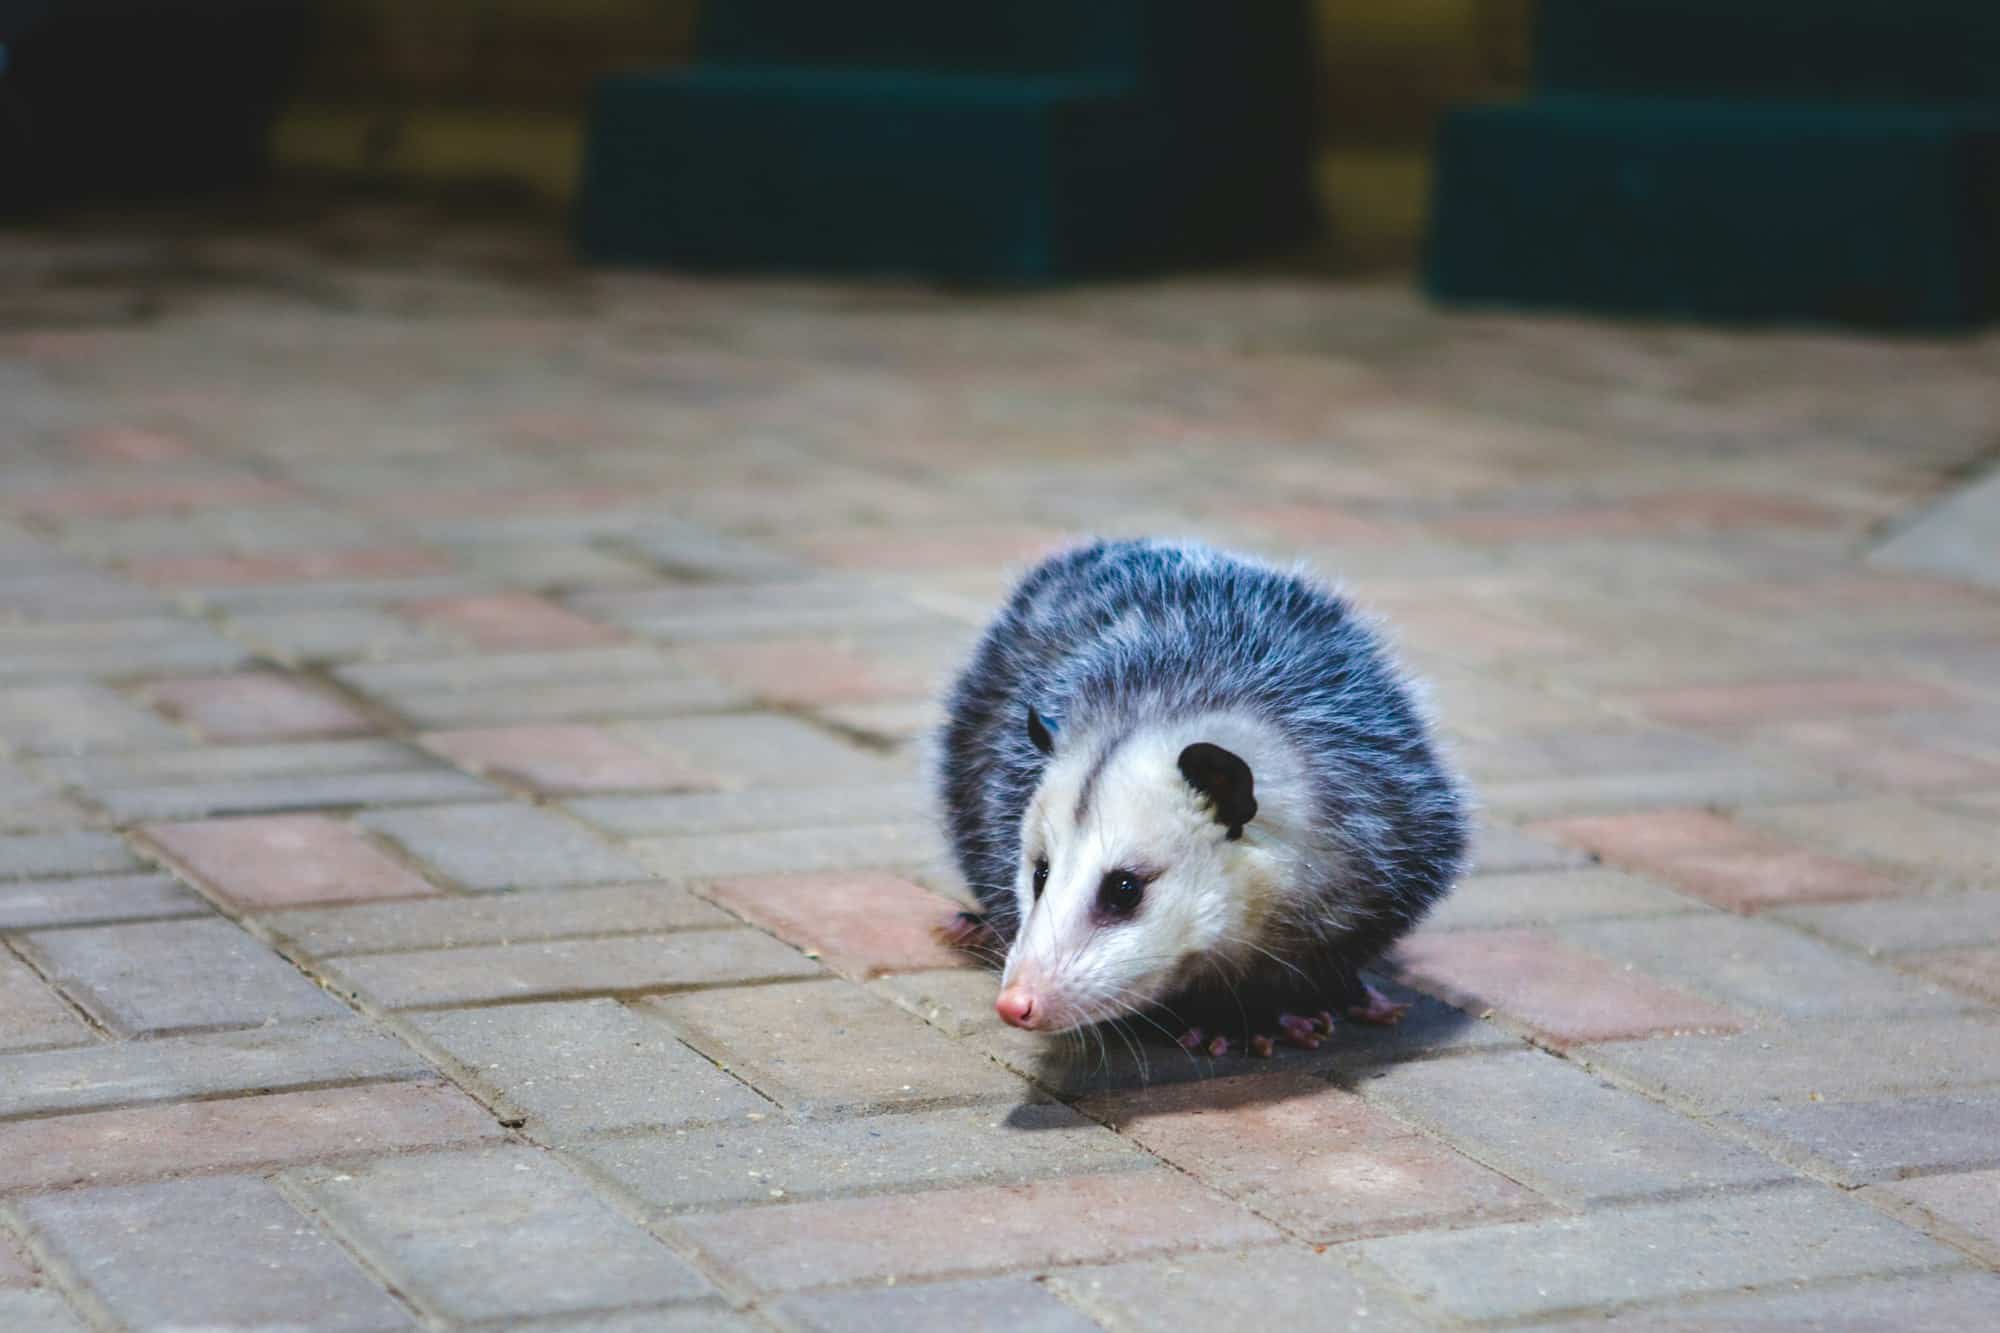 Opossum on the floor at a zoo